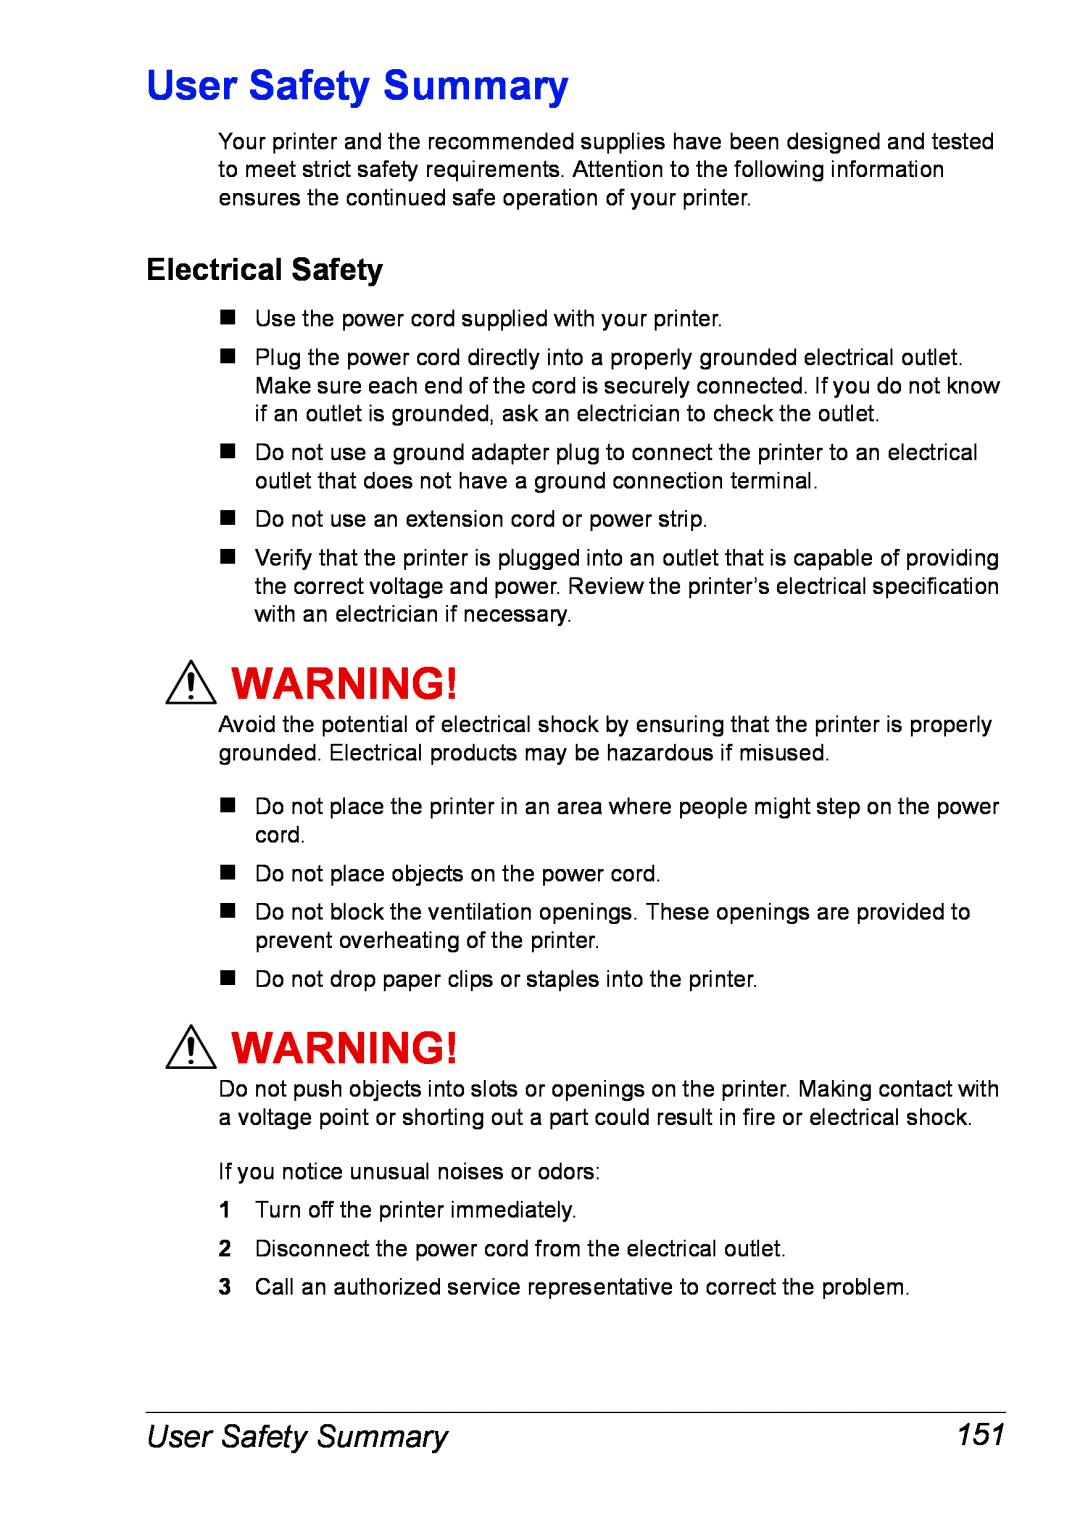 Xerox 6120 manual User Safety Summary, Electrical Safety 